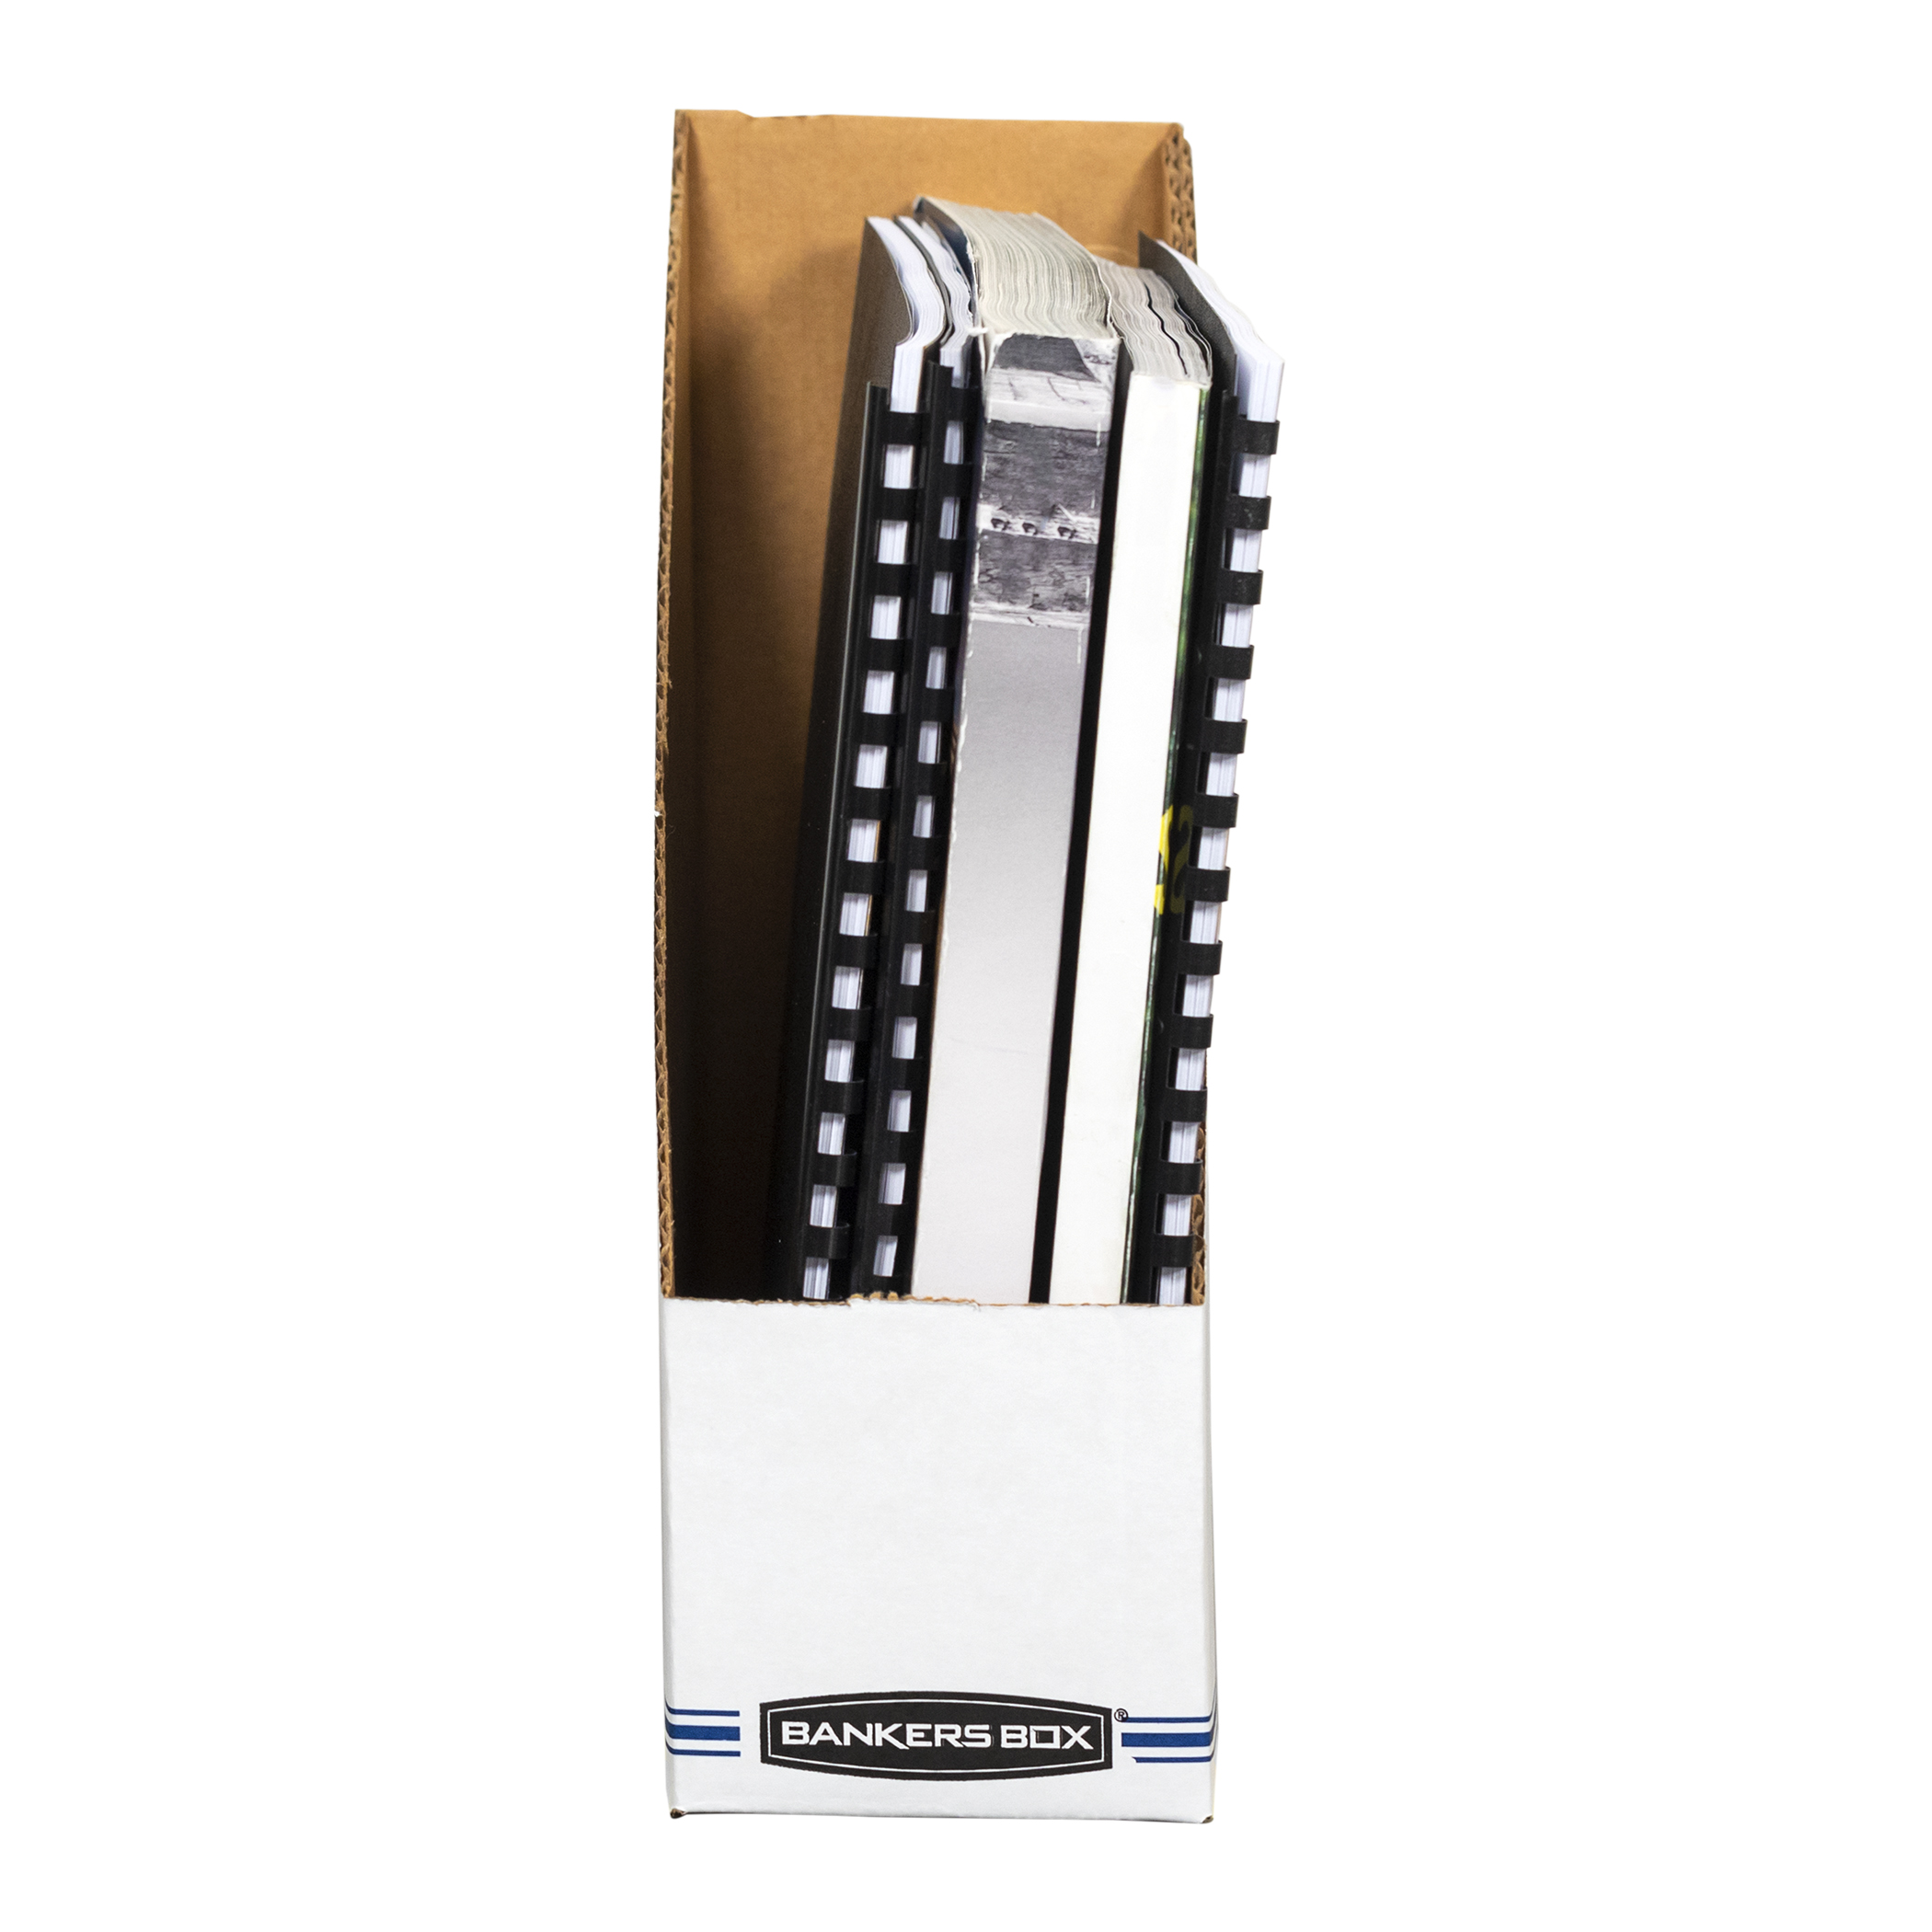 Fellowes Bankers Box Stor/File Magazine File - Corrugated Cardboard - image 4 of 9